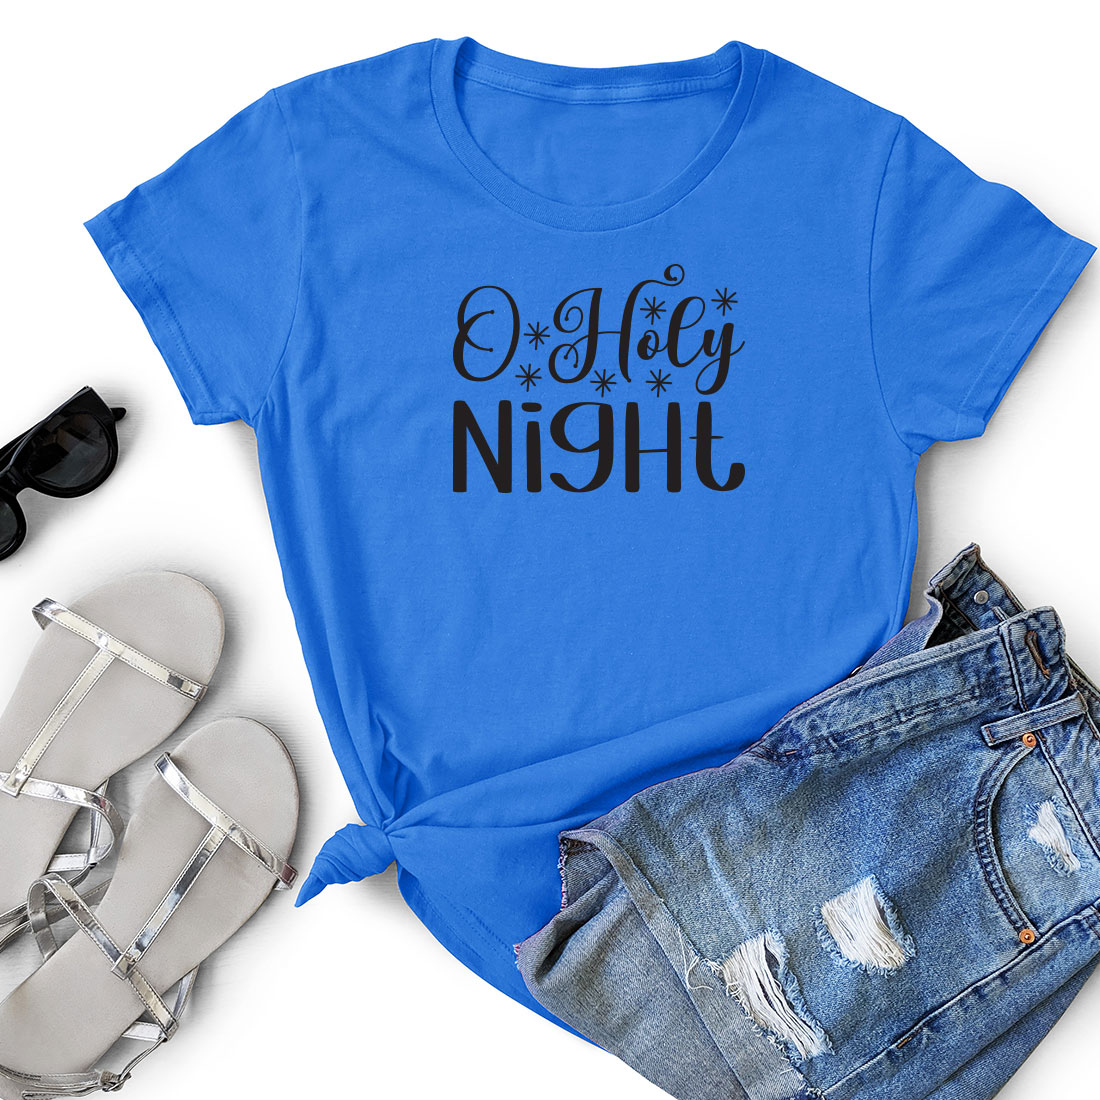 T - shirt that says oh holy night next to a pair of shorts and.